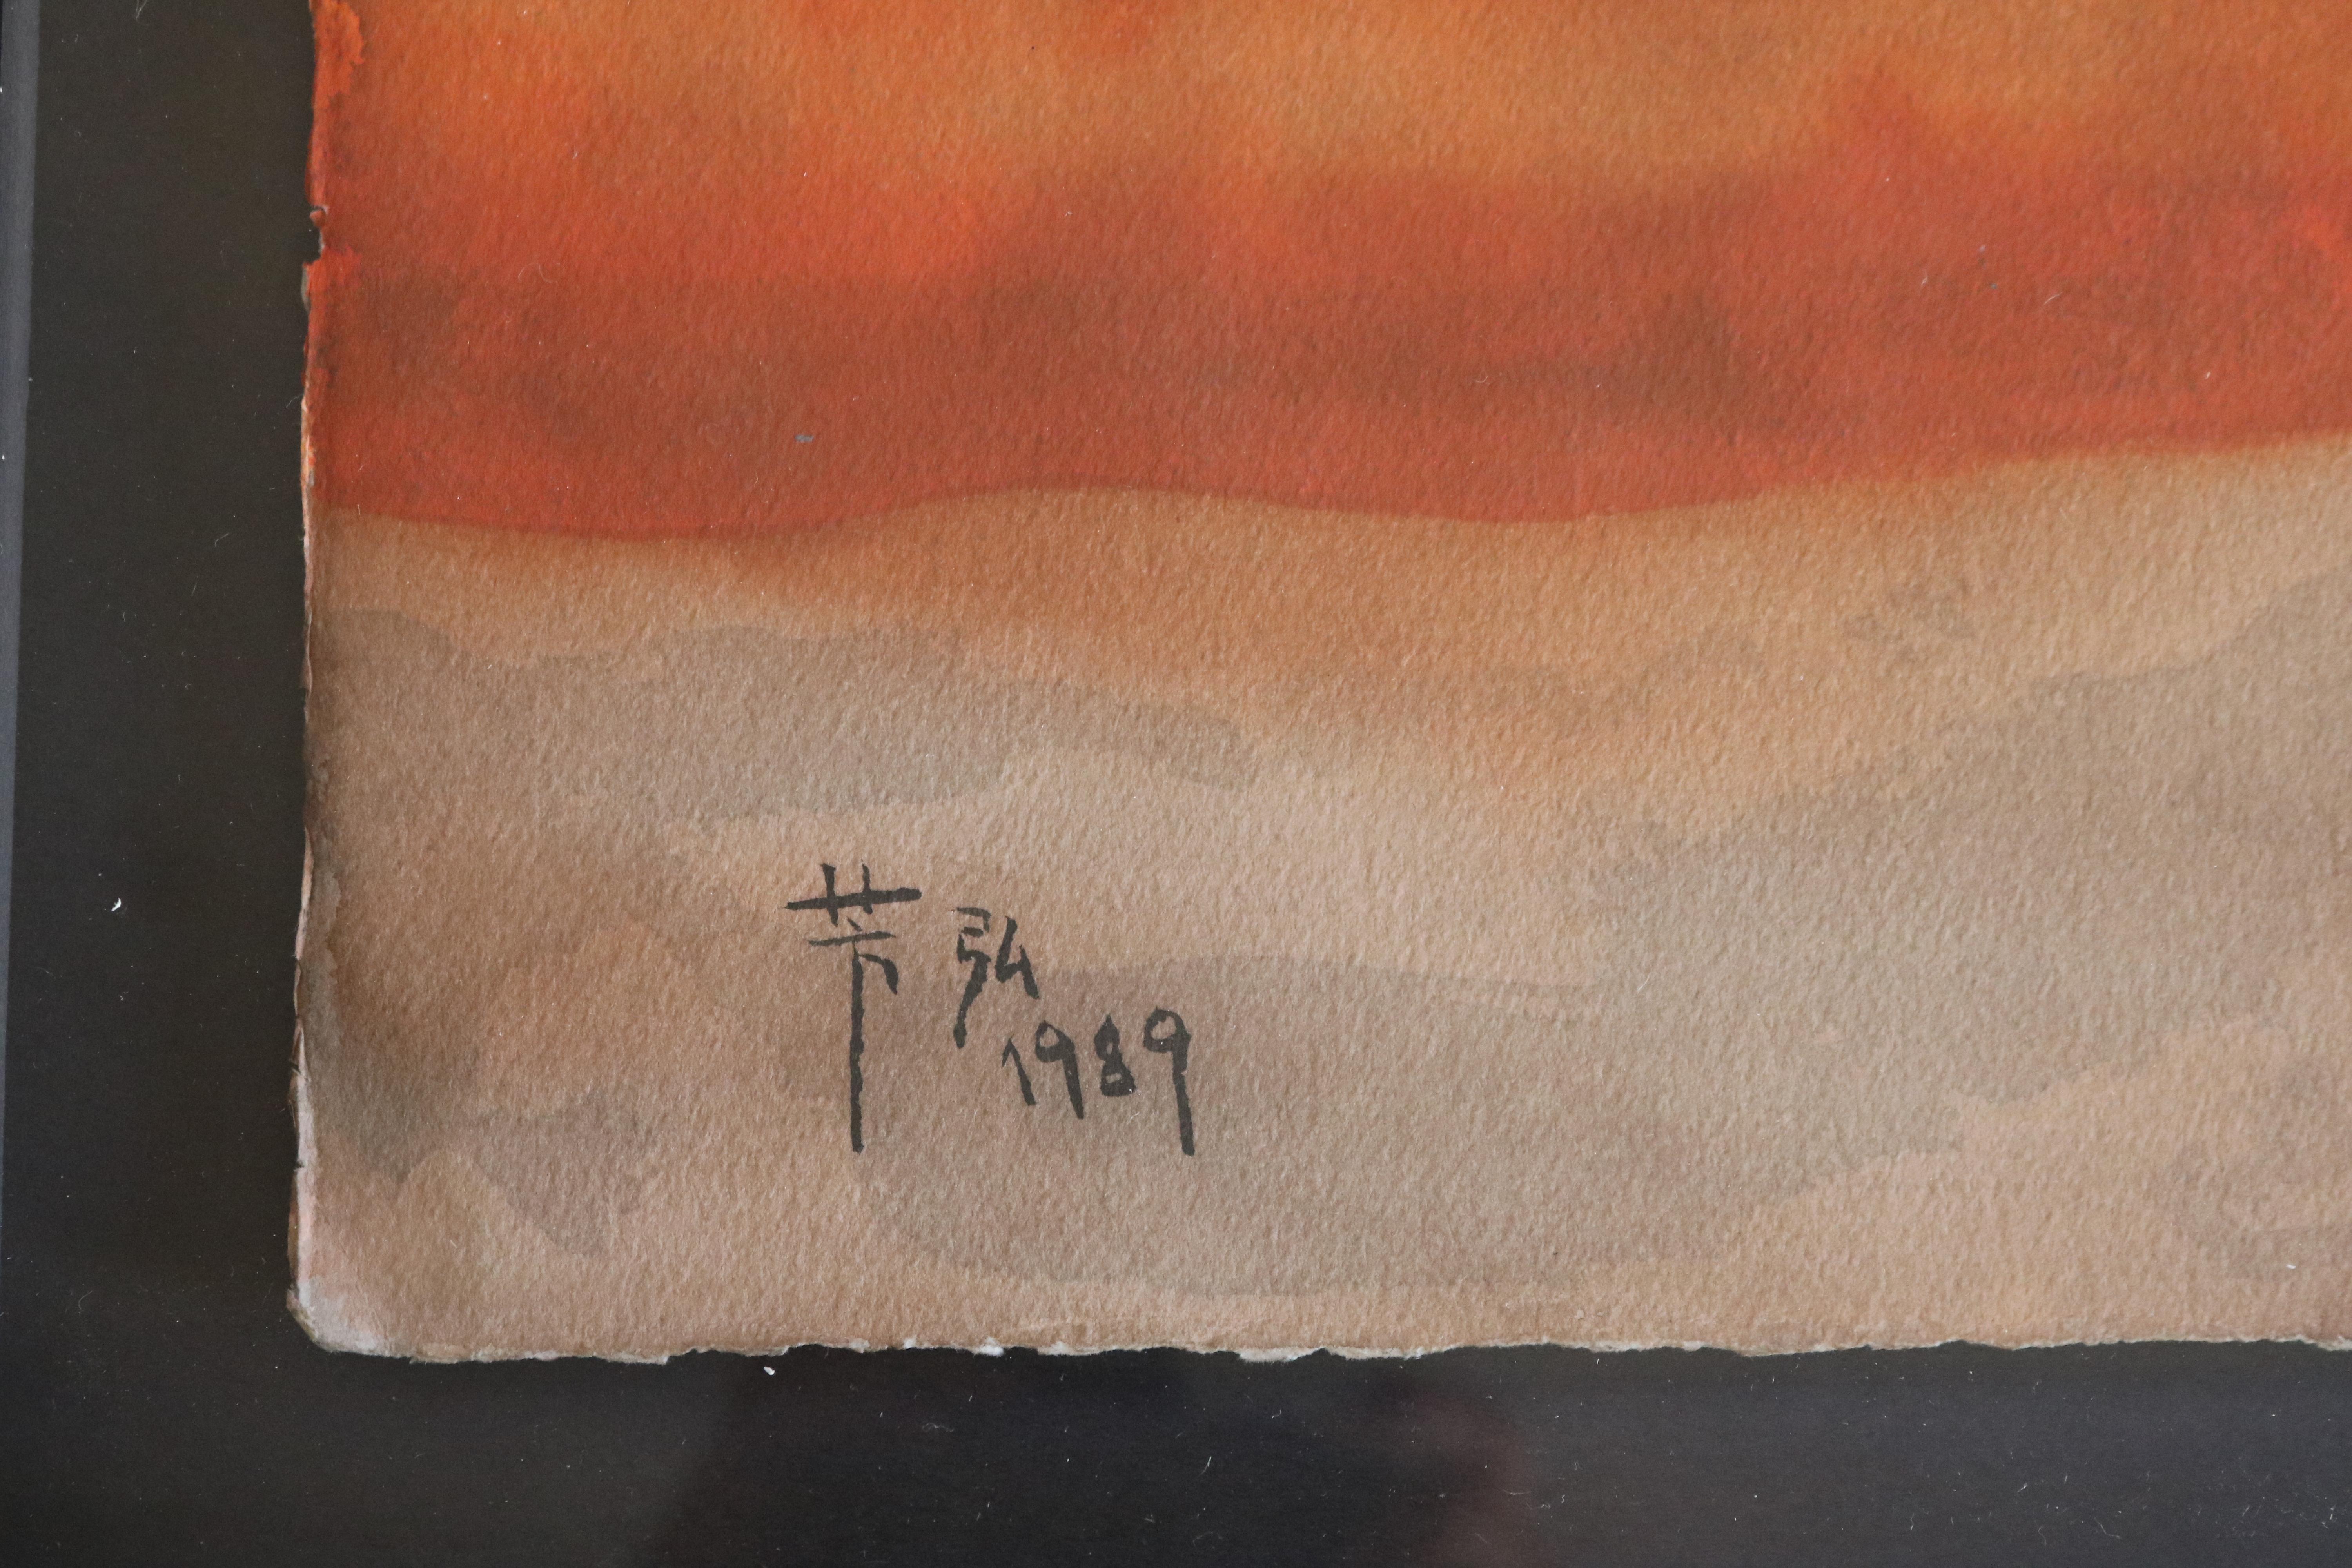 A smokey, graphic watercolor painting by Yoshihiro Ueda. It depicts a figure standing against a seeming backdrop of desert sand dunes and looking up at a piercing red sun and warm sky in the distance. The blocked, translucent gray overlays serve to